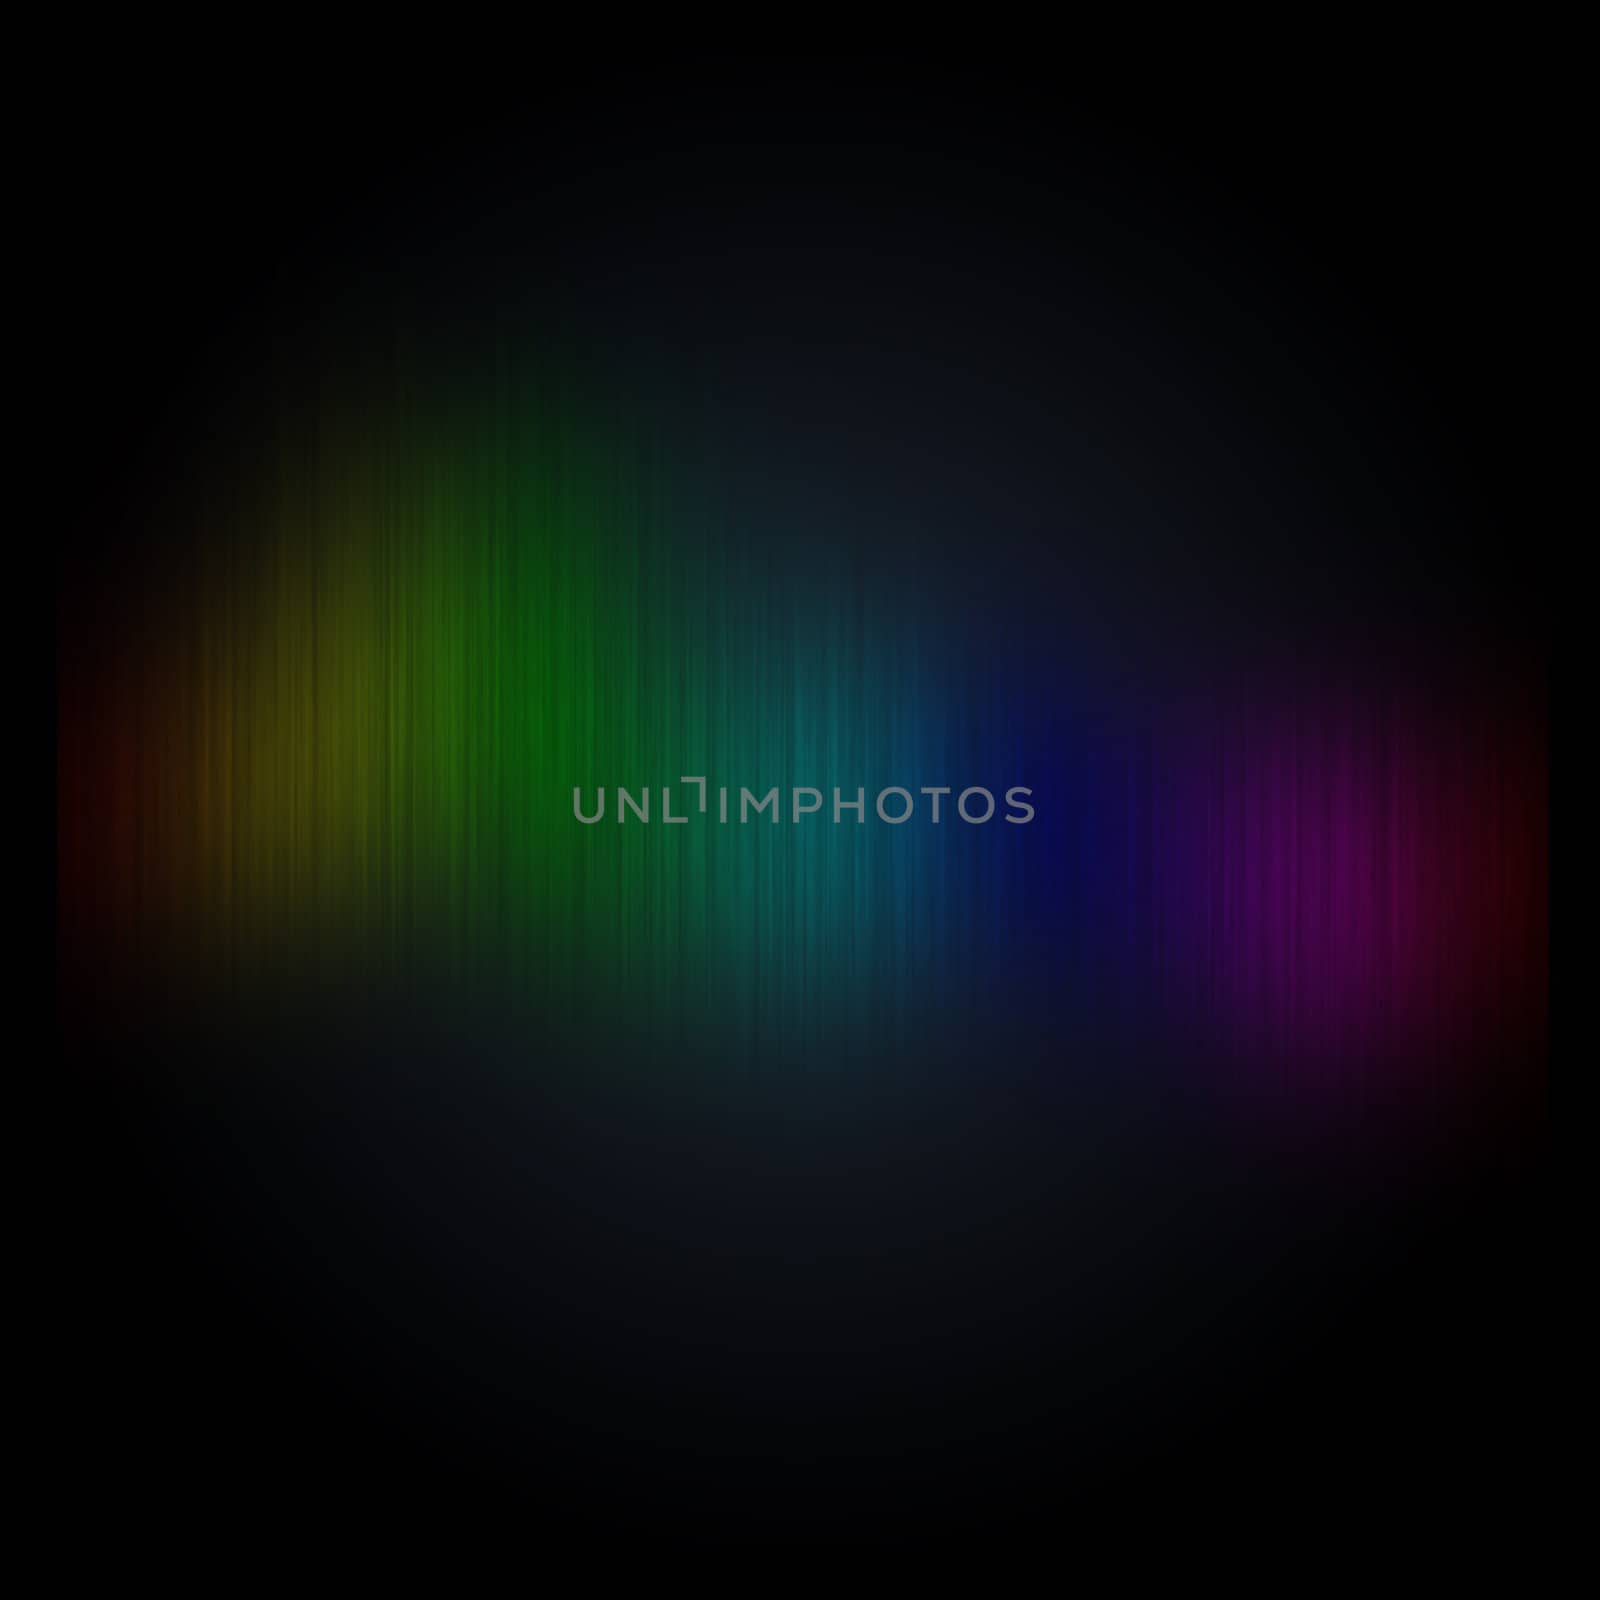 Abstract background with blurred lights